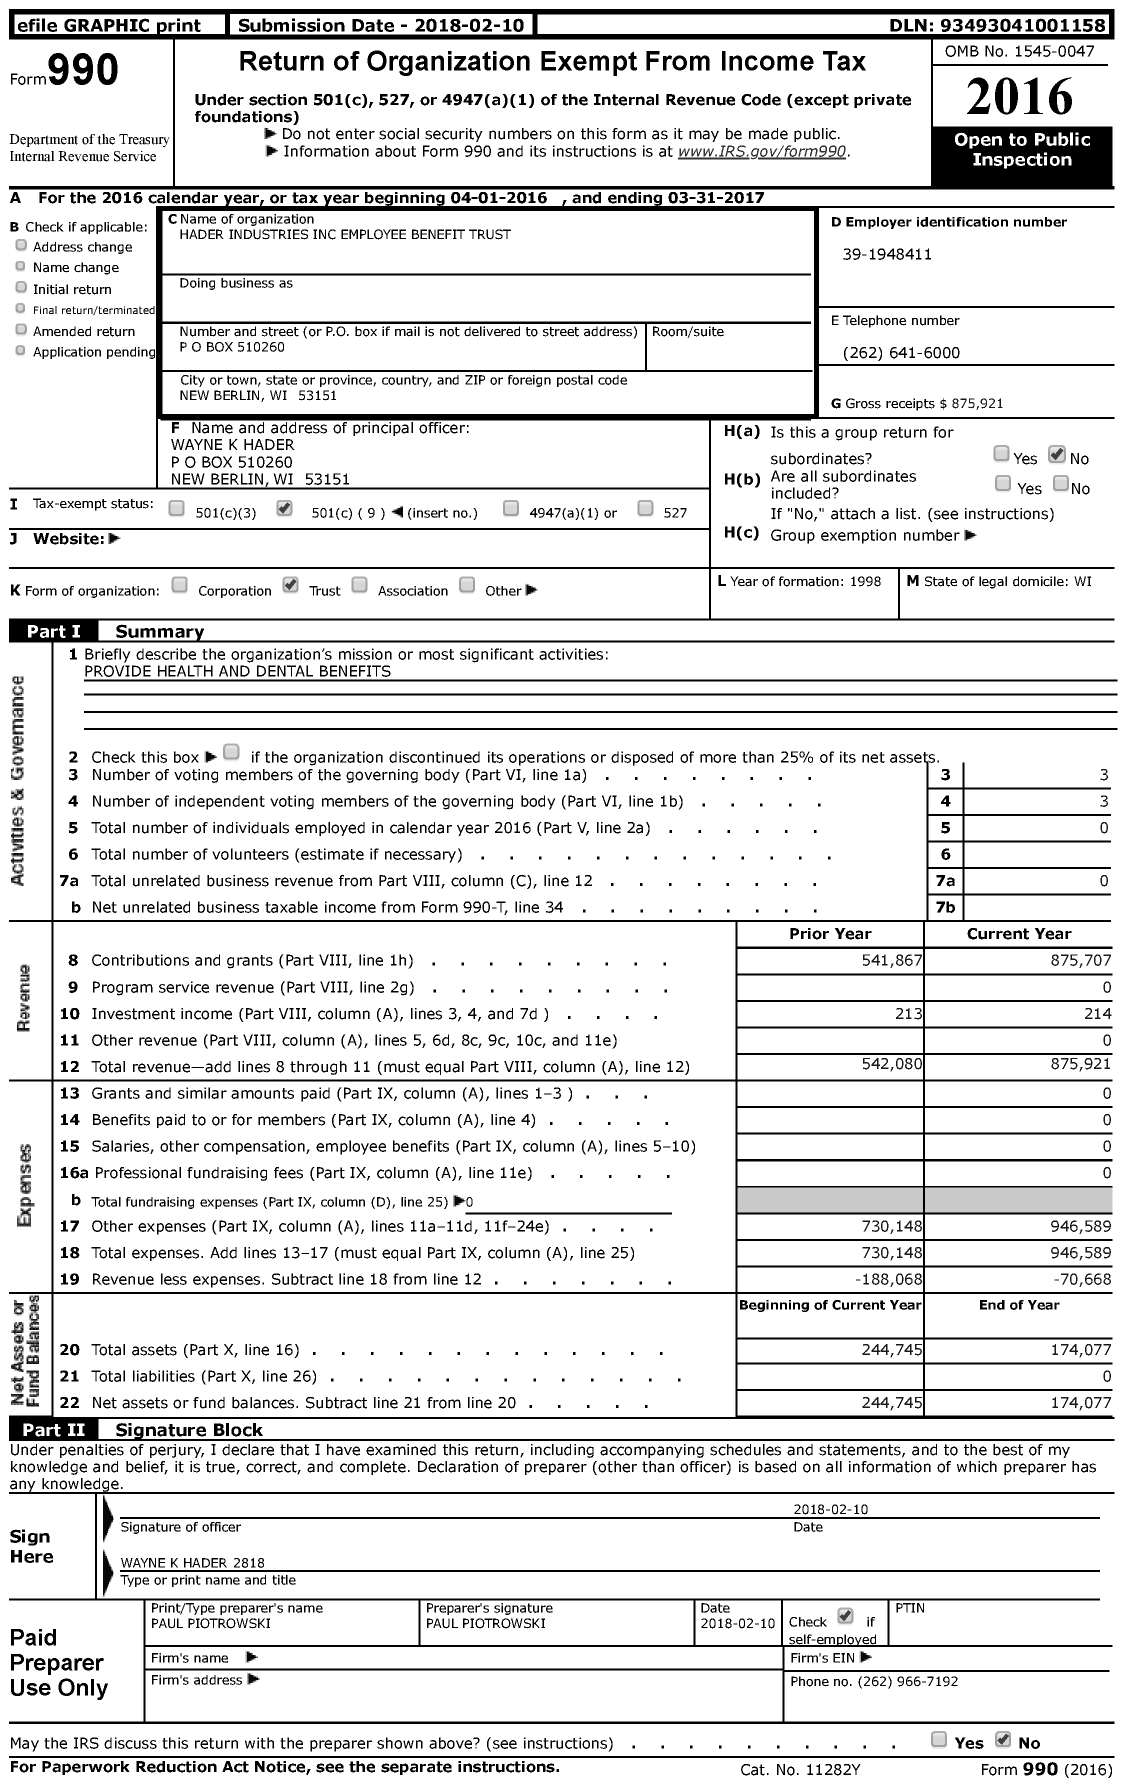 Image of first page of 2016 Form 990 for Hader Industries Employee Benefit Trust